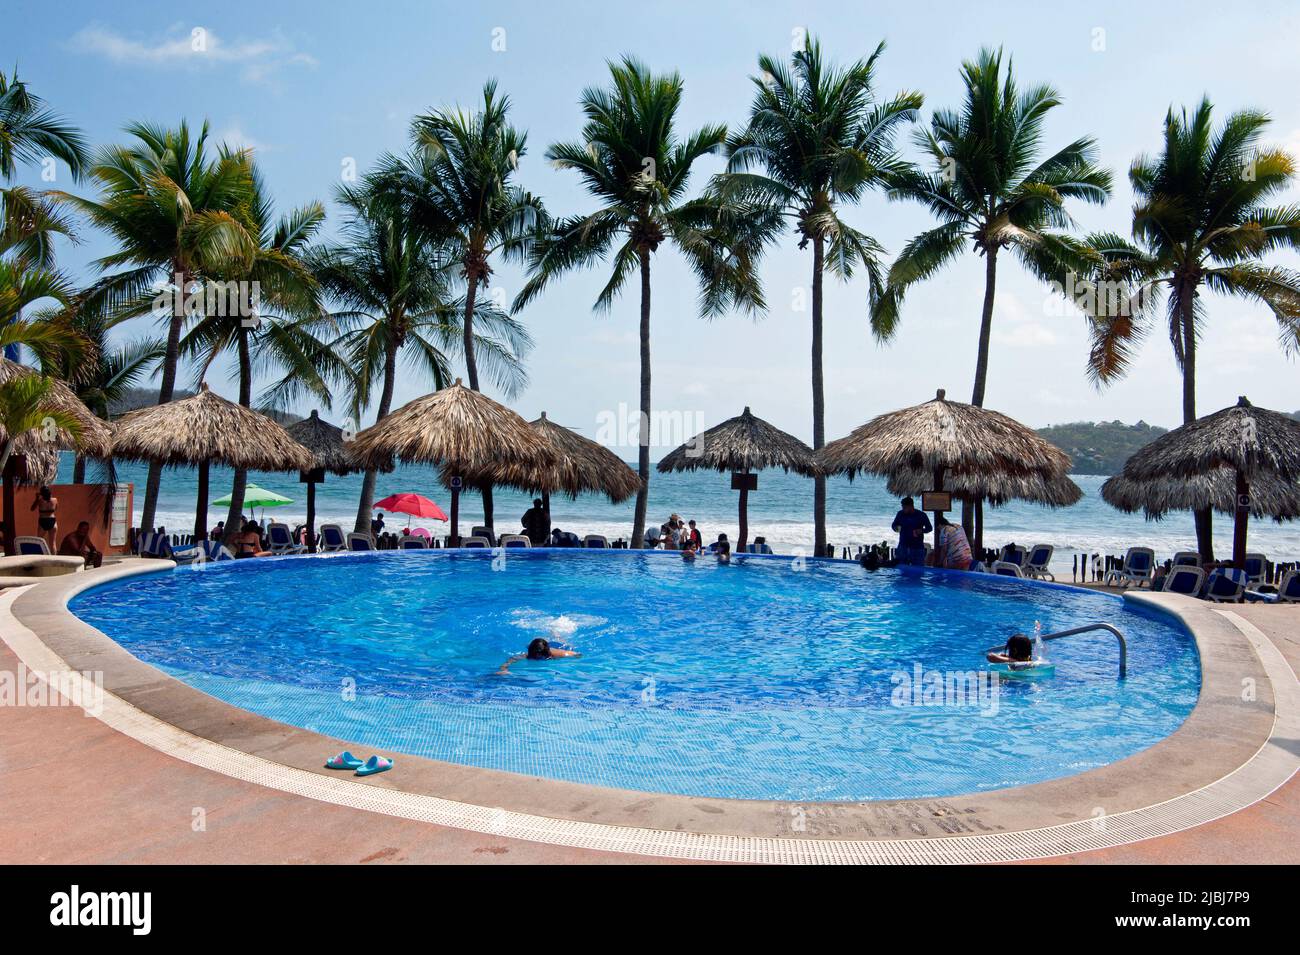 Beachfront hotel with swimming pool and palm trees in Zihuatanejo, Mexico Stock Photo